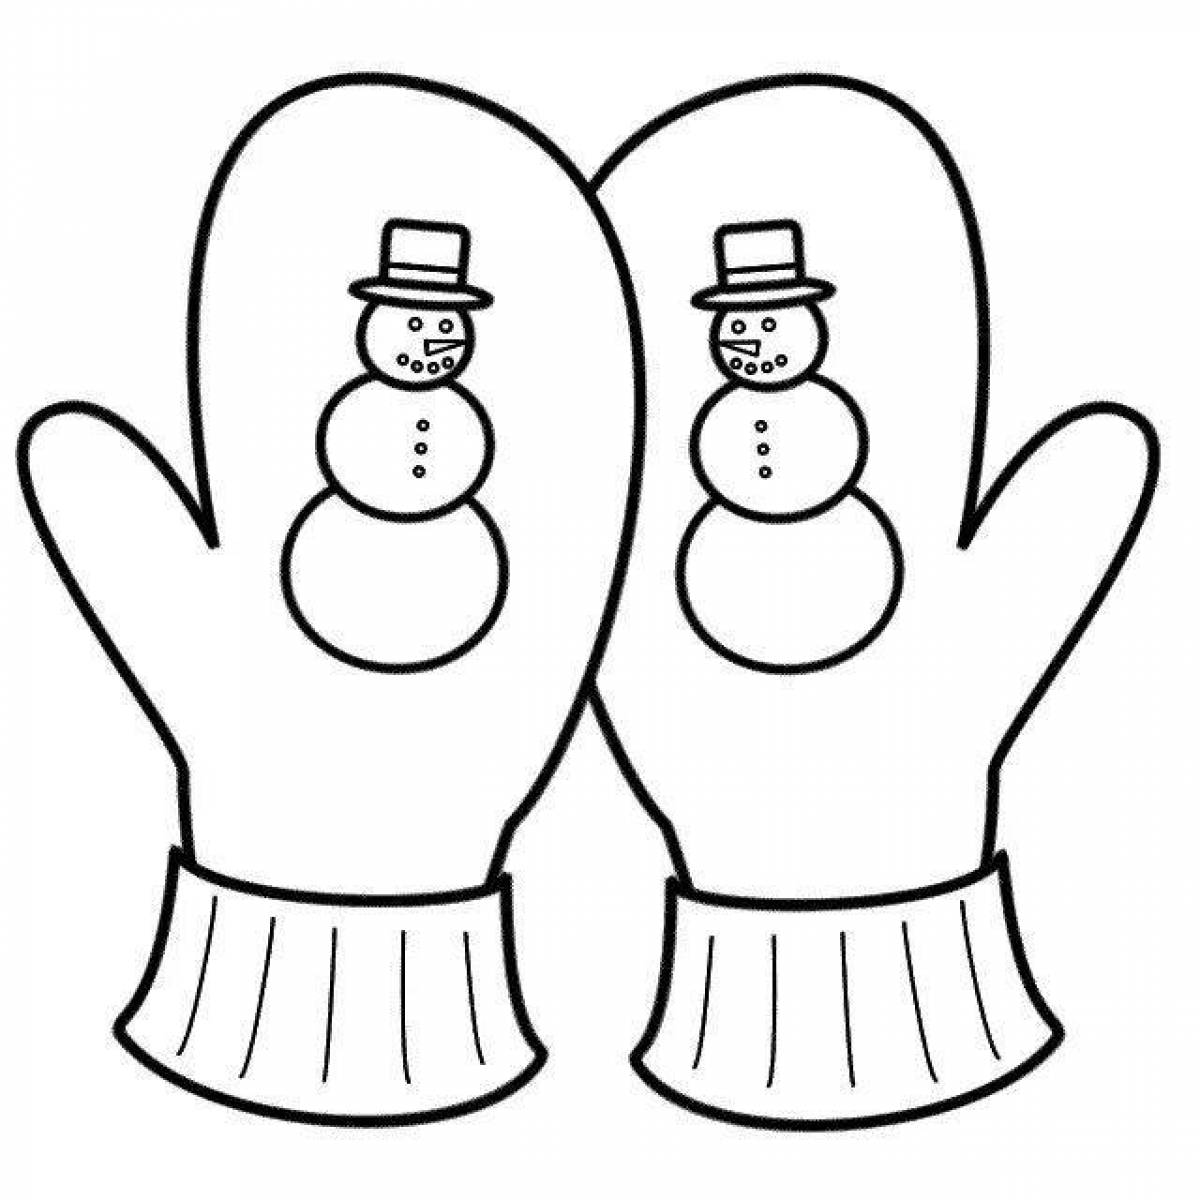 Cute mittens coloring book for kids